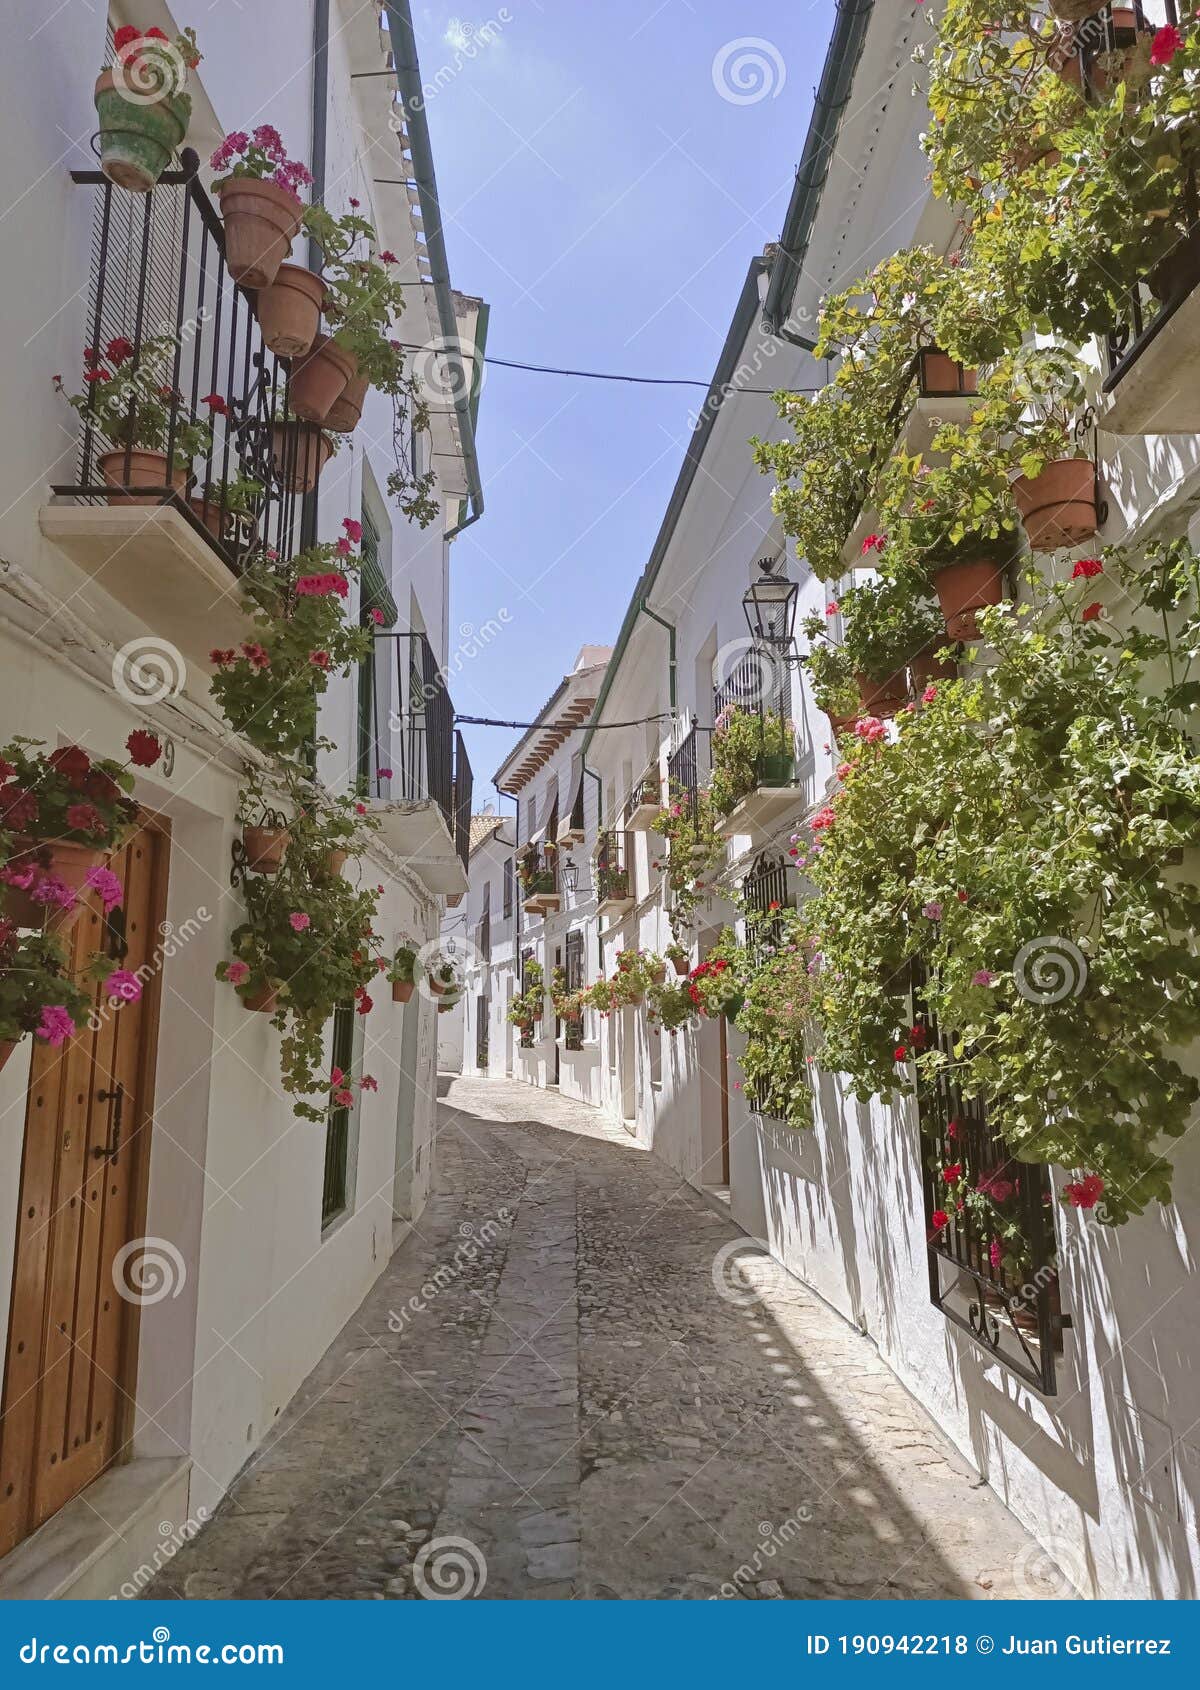 streets full of flowers in old town of priego de cÃÂ³rdoba andalusia spain